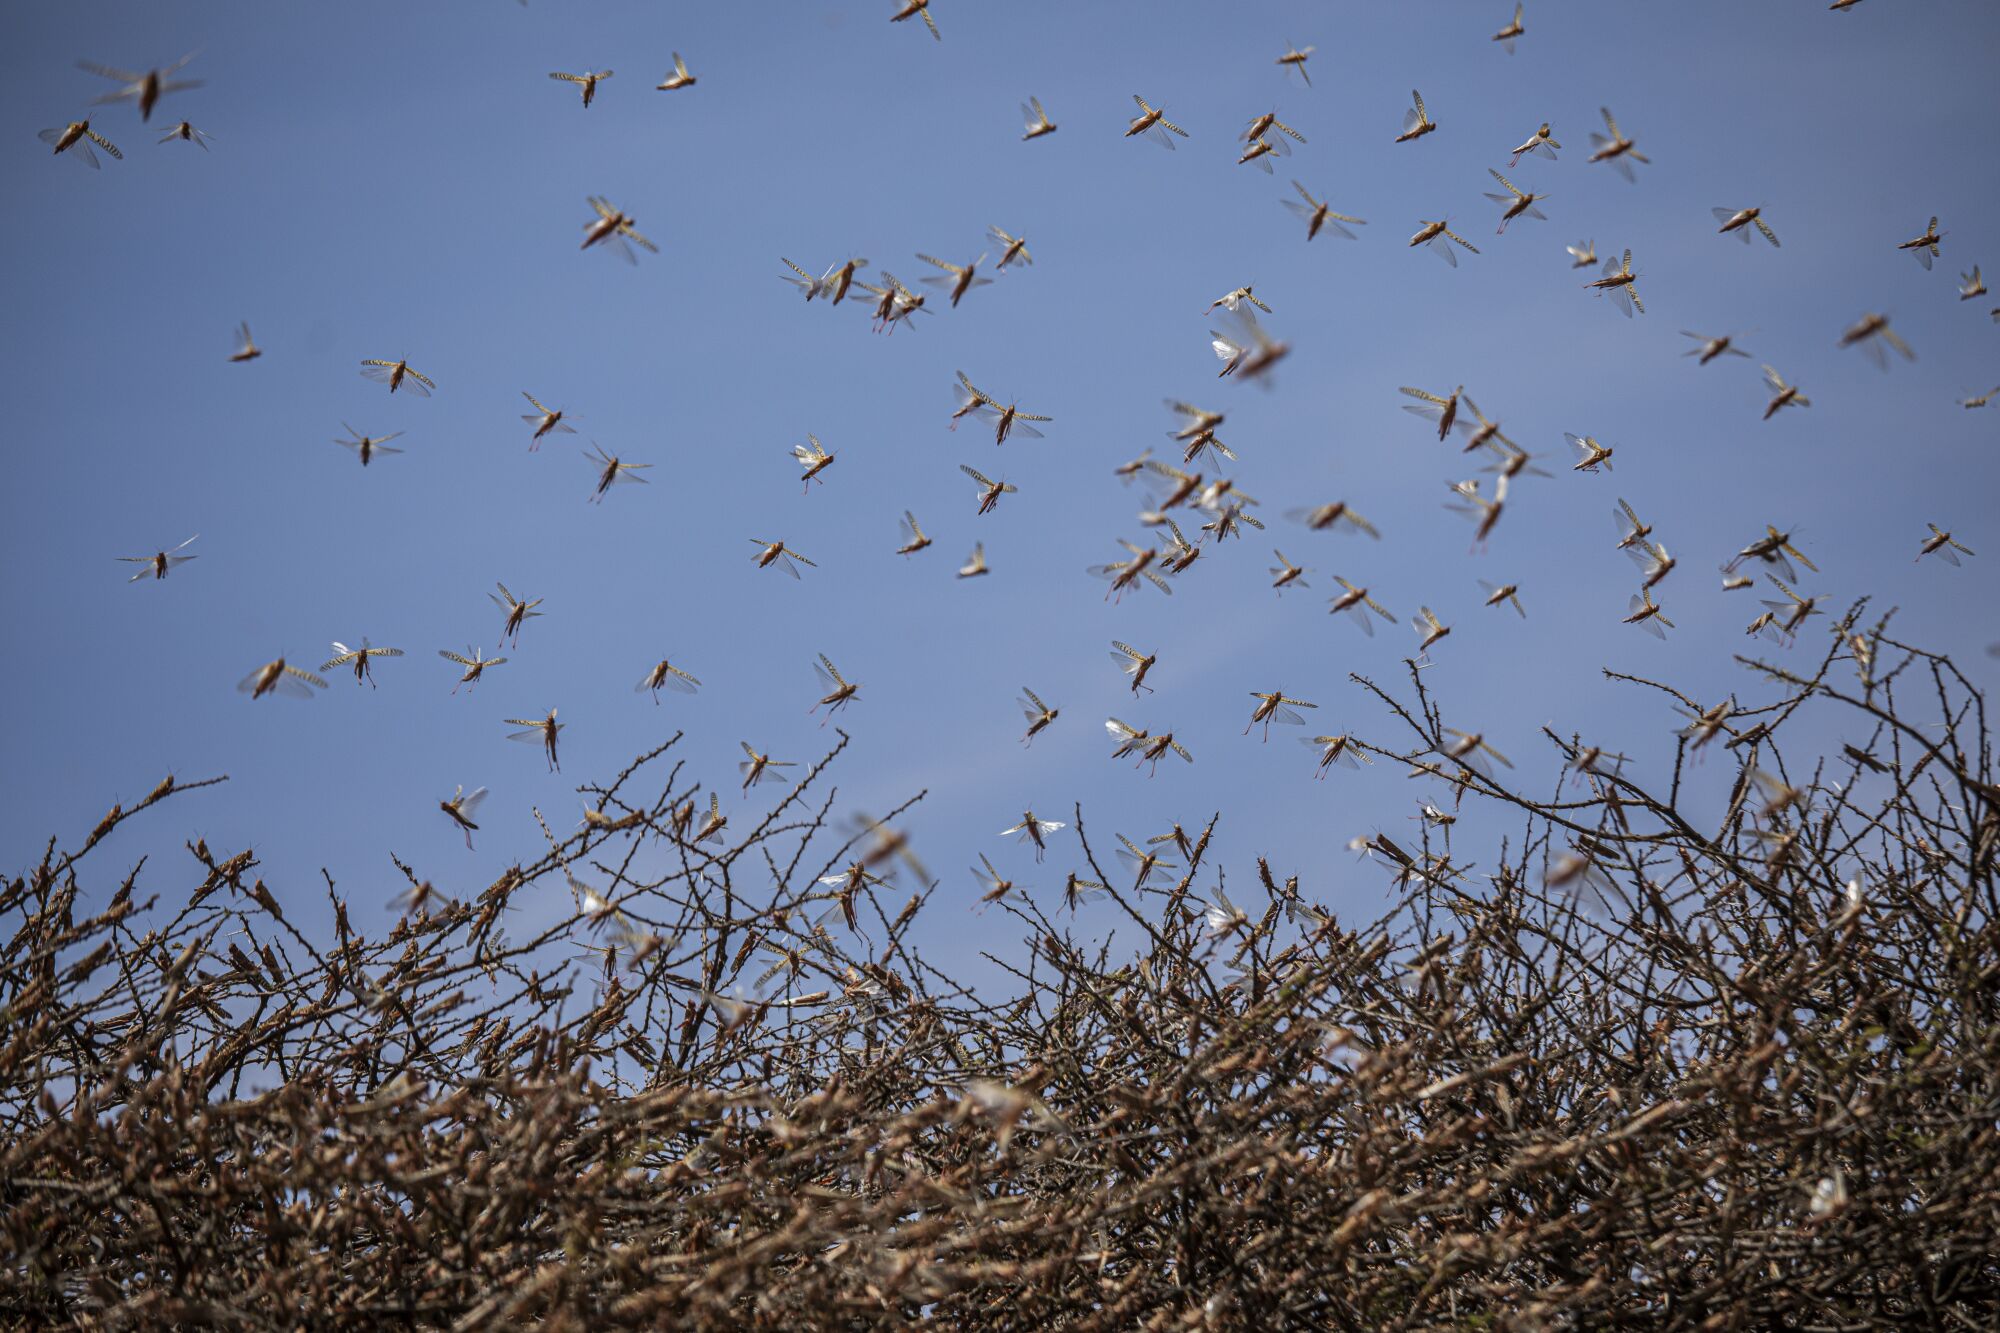 A swarm of desert locusts flies over an acacia tree in a remote part of Somalia.